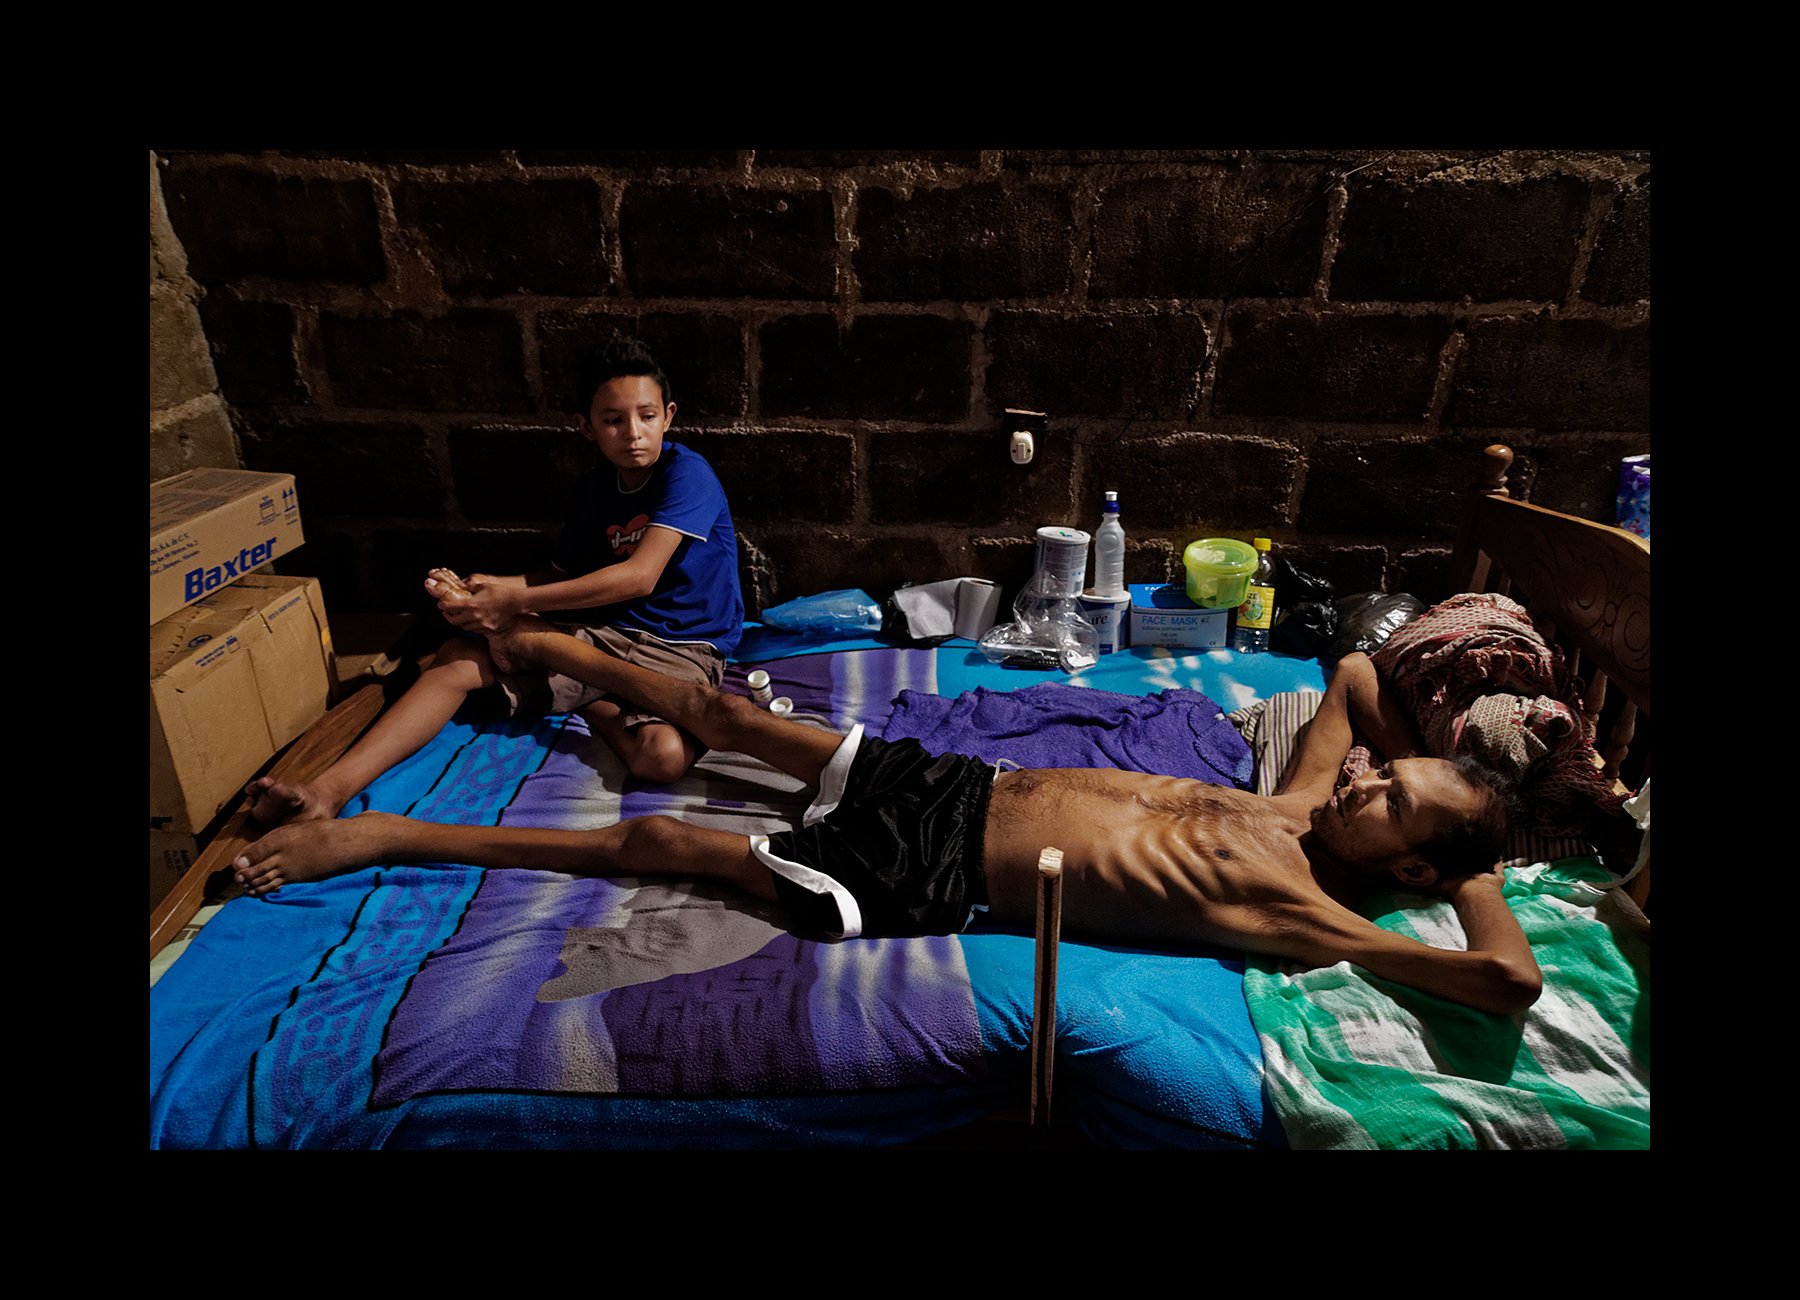  Cesar, 12, tends to his ailing father, Don Julio Lopez, 35, a former sugarcane worker, as he suffers through the end stages of CKDnT, in Chichigalpa, Nicaragua on Jan. 5, 2015. He worked for 15 years in the cane fields before getting sick. 